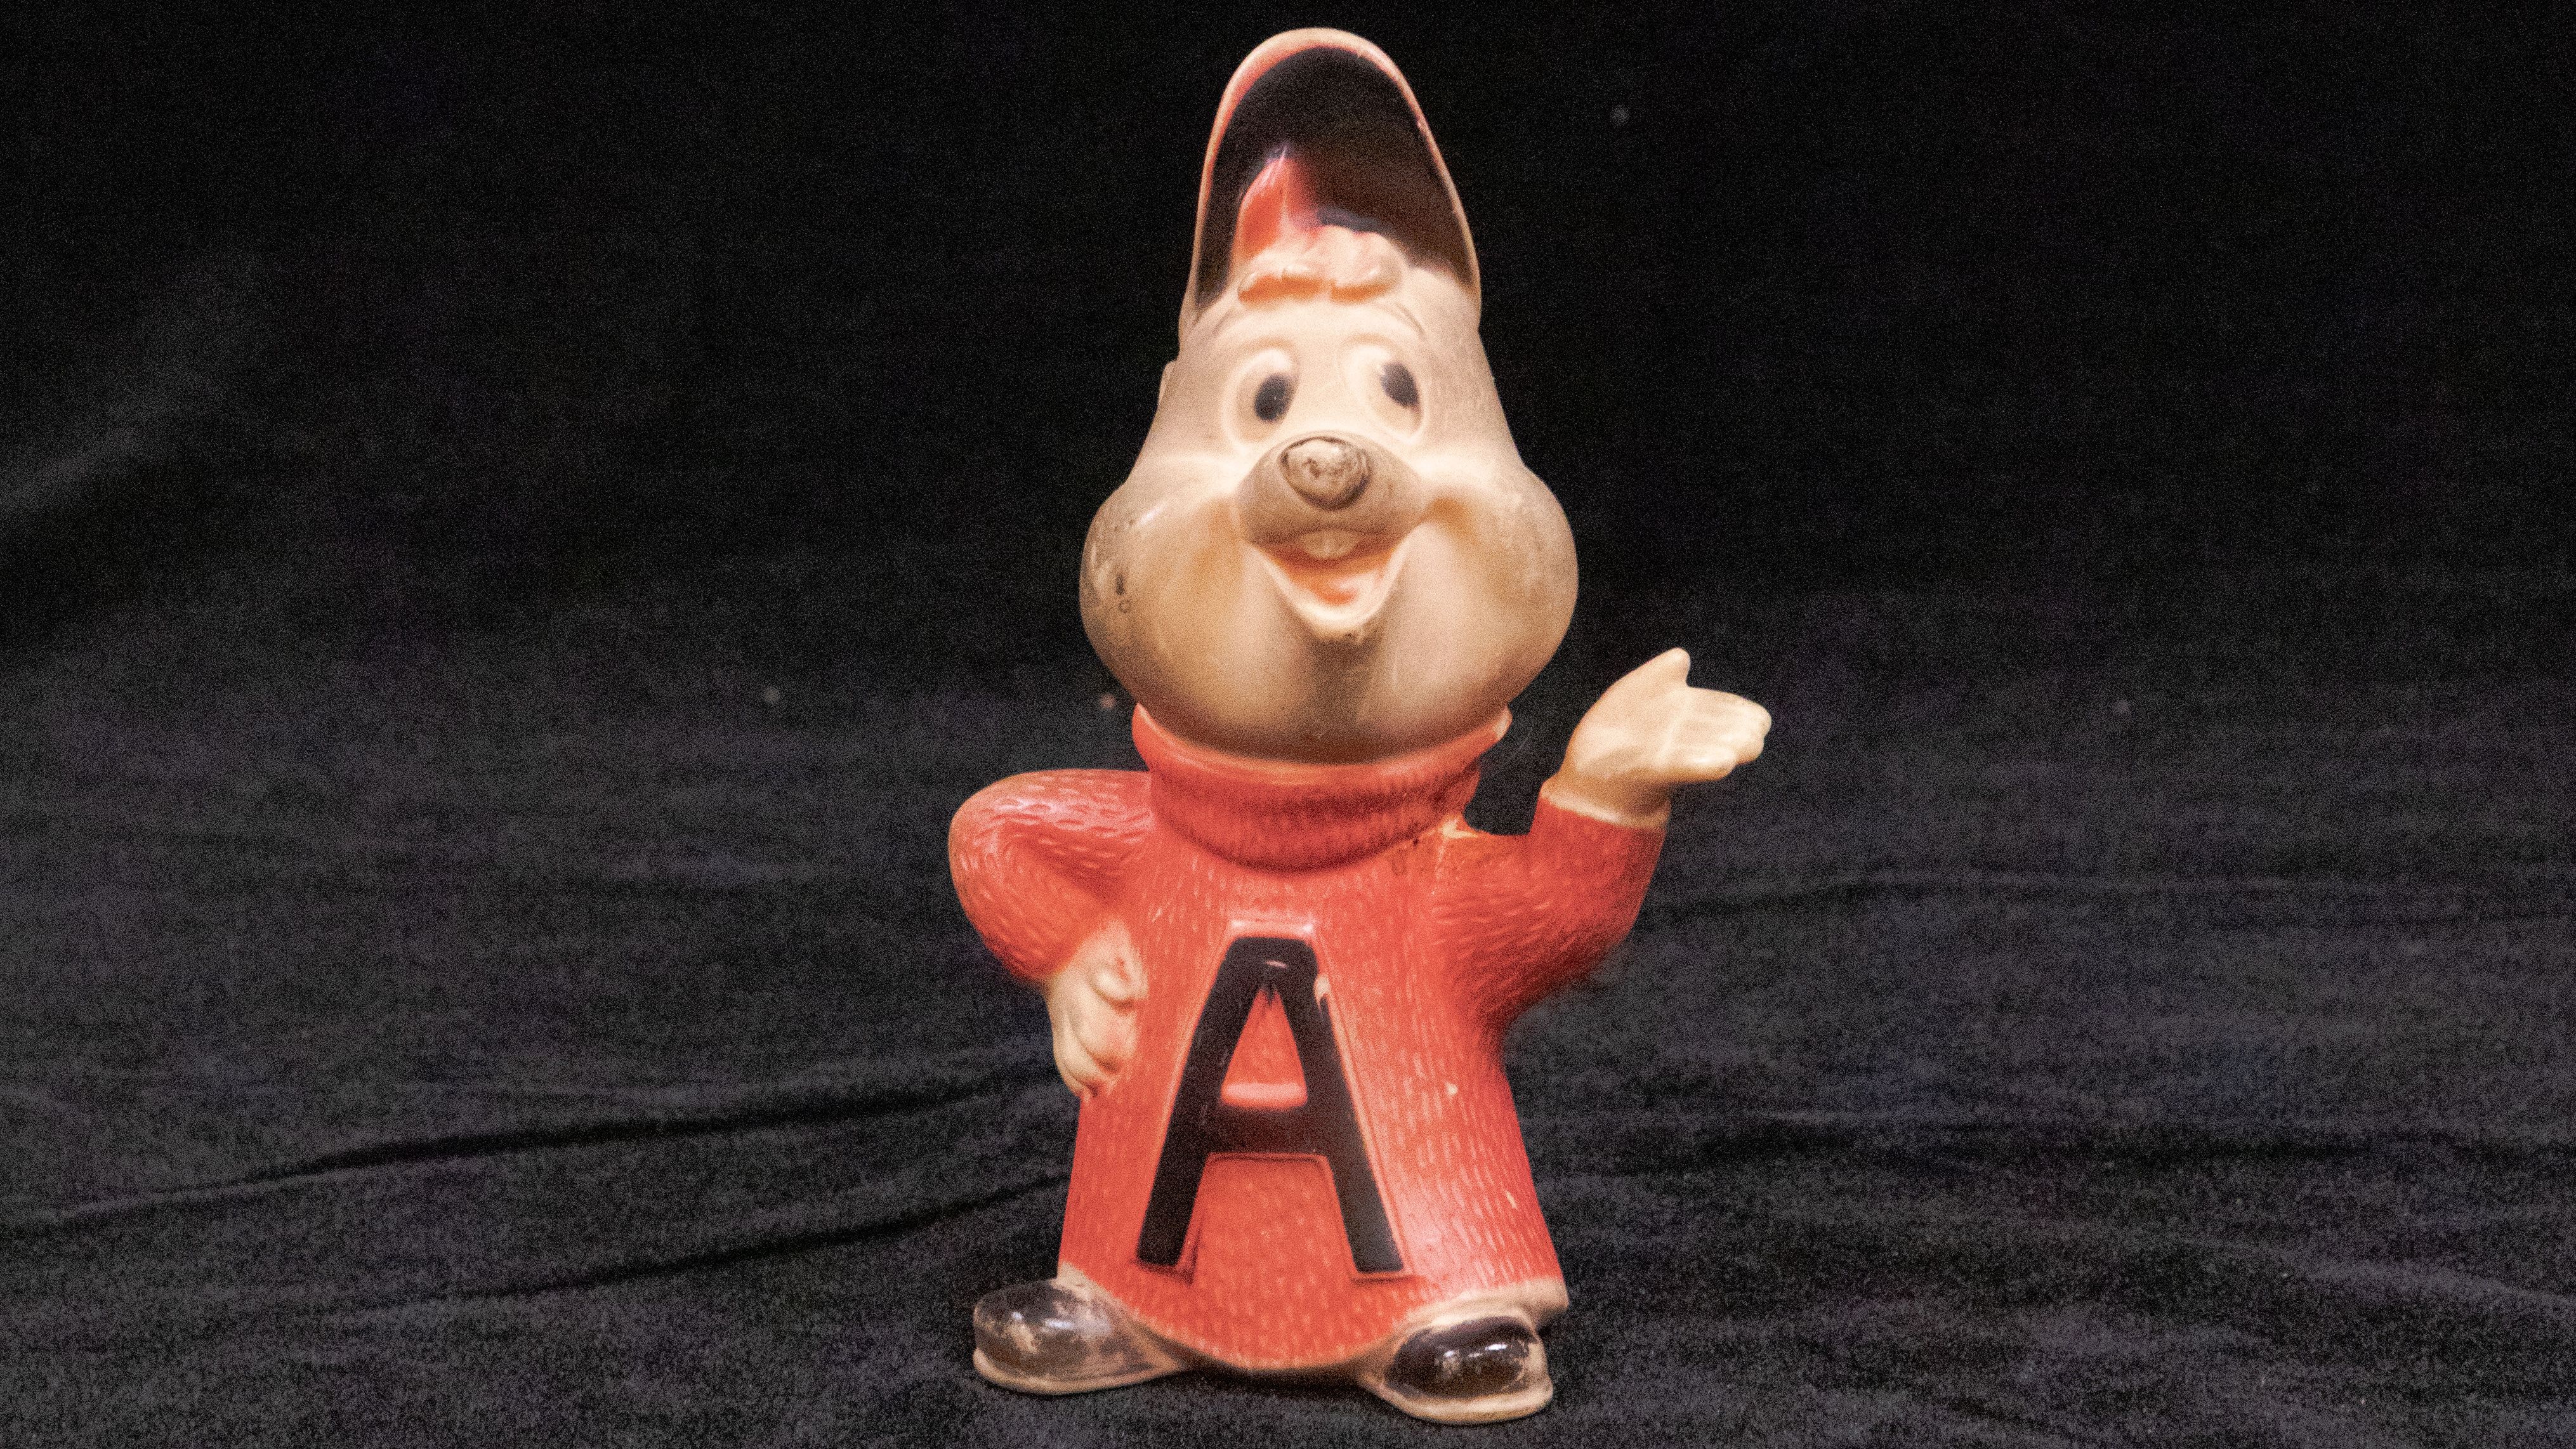 FBI on X: The #FBI's December #ArtifactOfTheMonth is a statuette of Alvin,  a chipmunk from the fictional band Alvin and the Chipmunks. Our agents once  placed a listening device—or “bug”—inside this toy